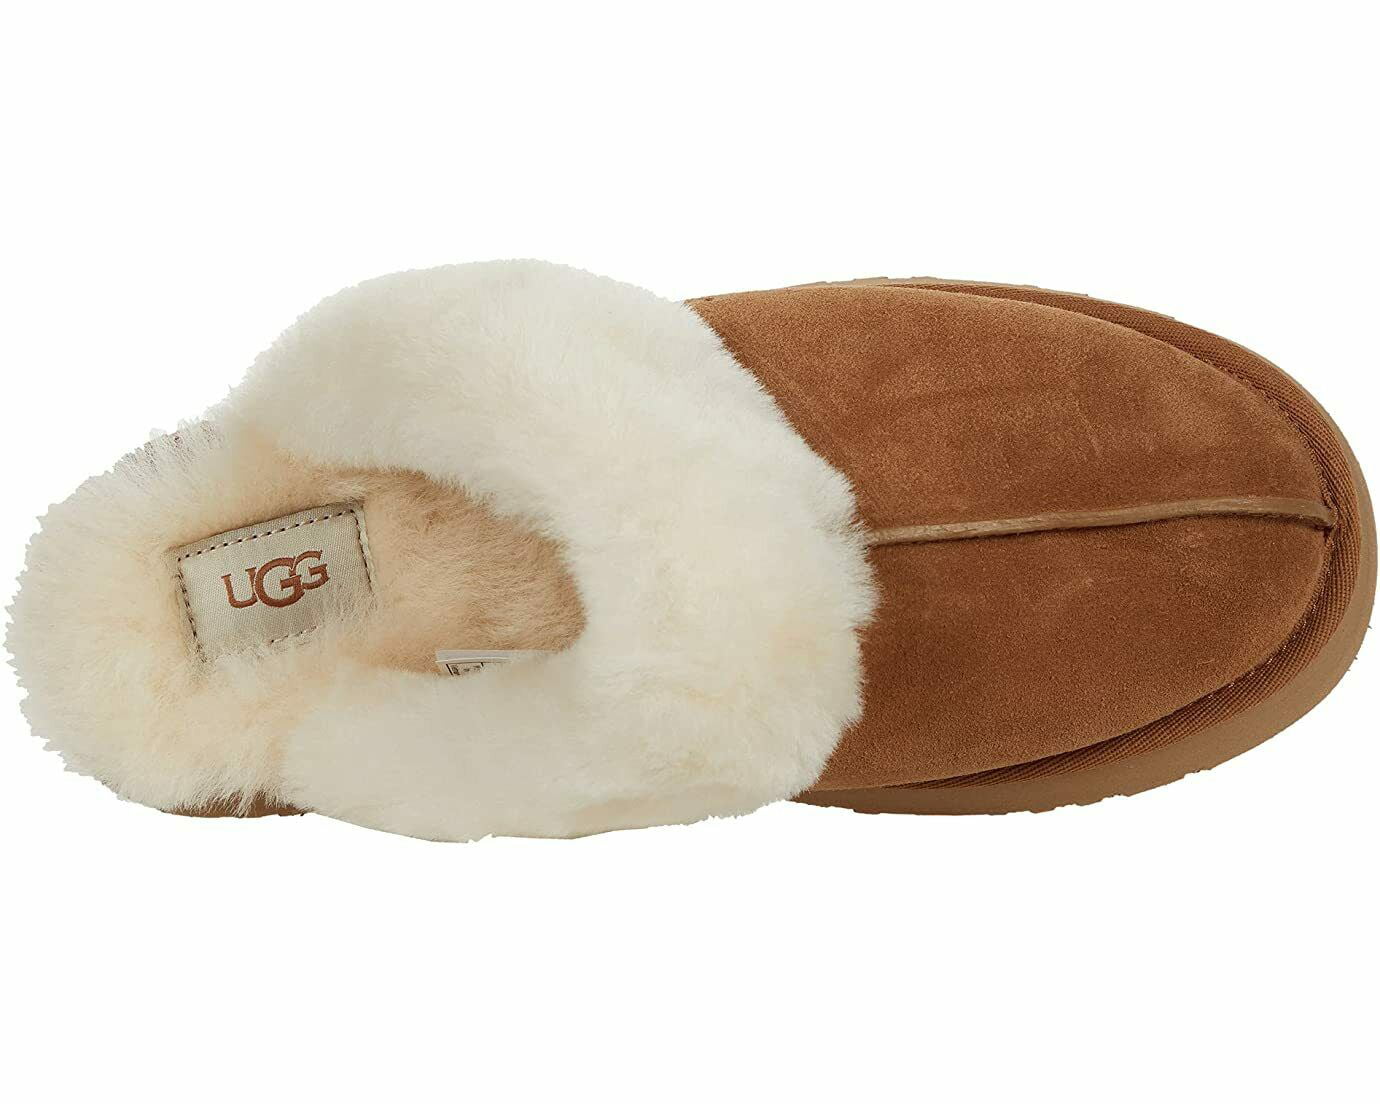 Ugg Fluff It Cali Topo slippers for Men - Brown in UAE | Level Shoes